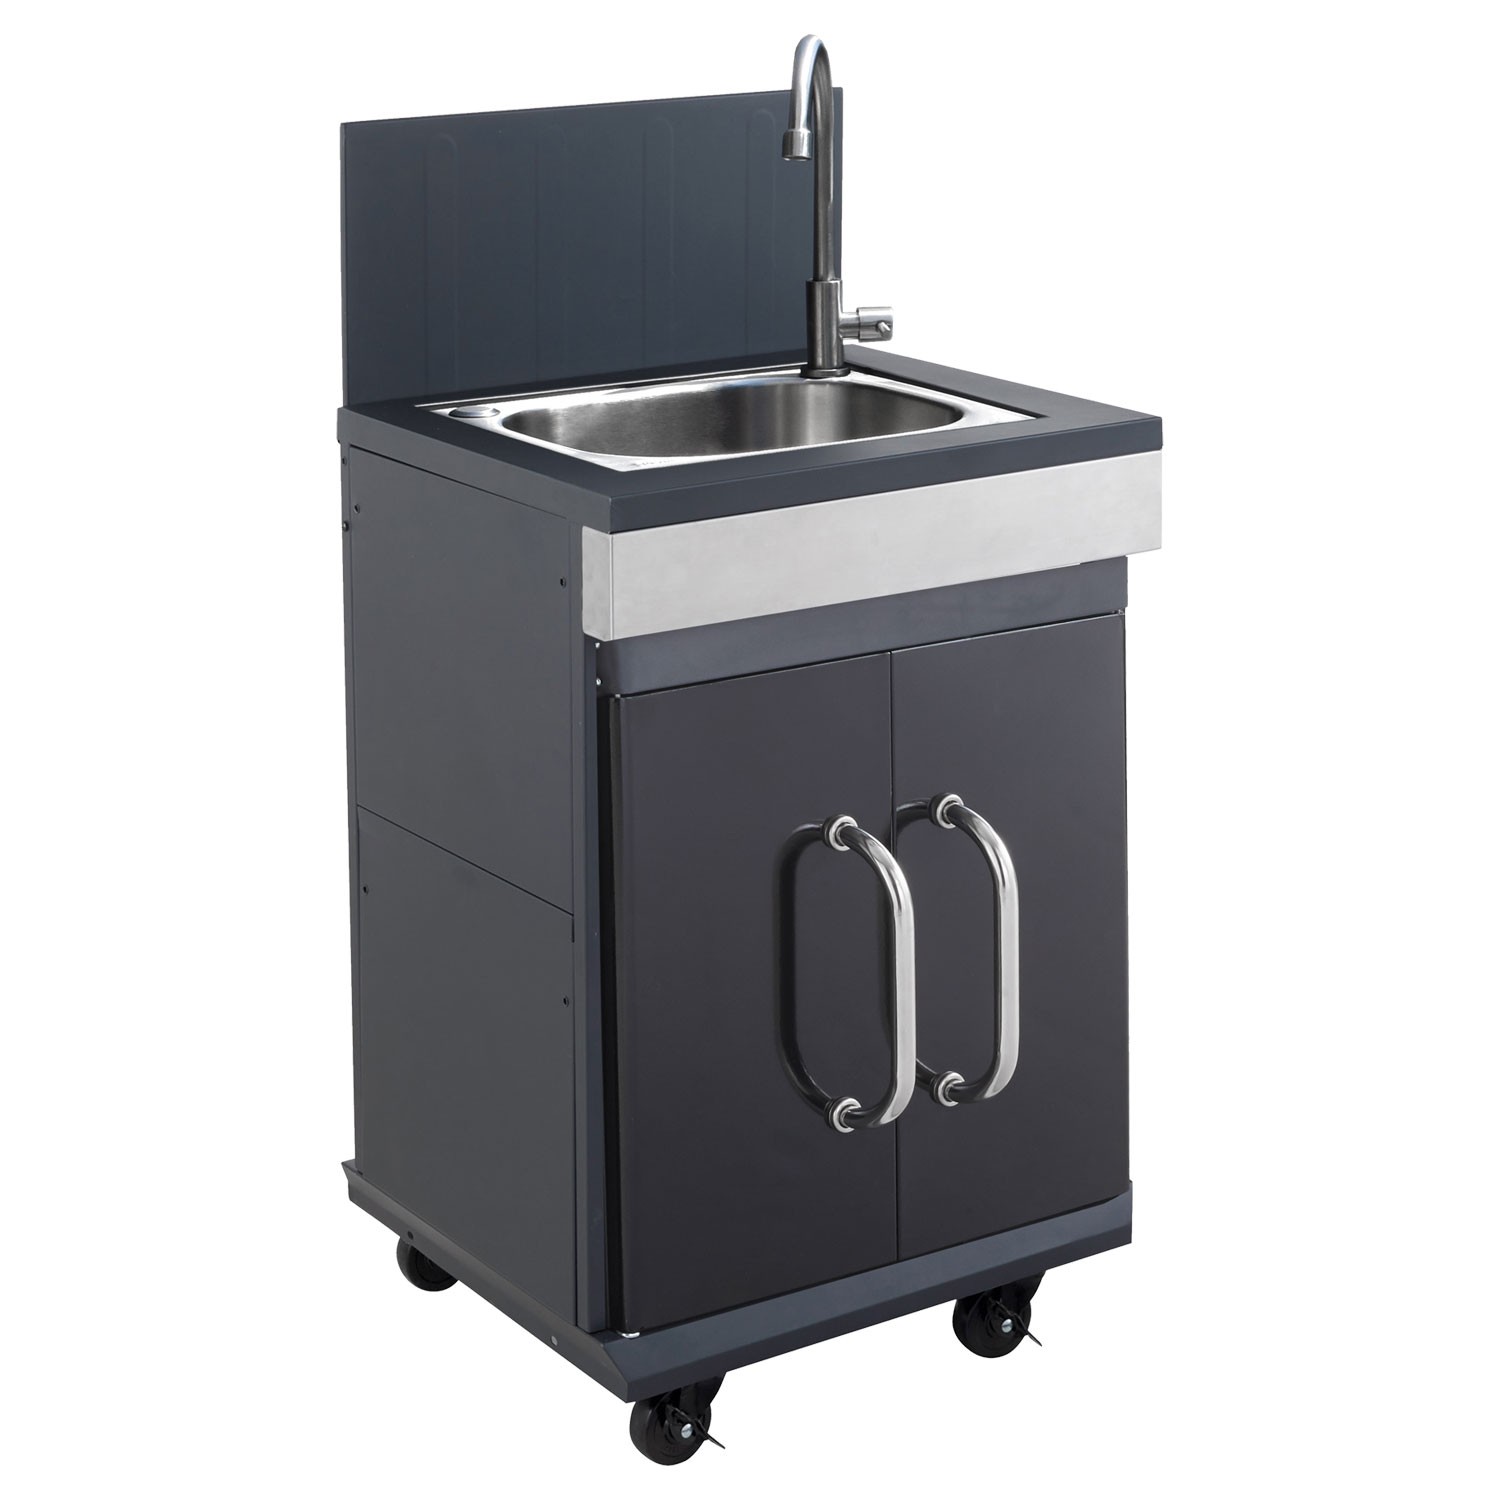 Evier integrale aux barbecues